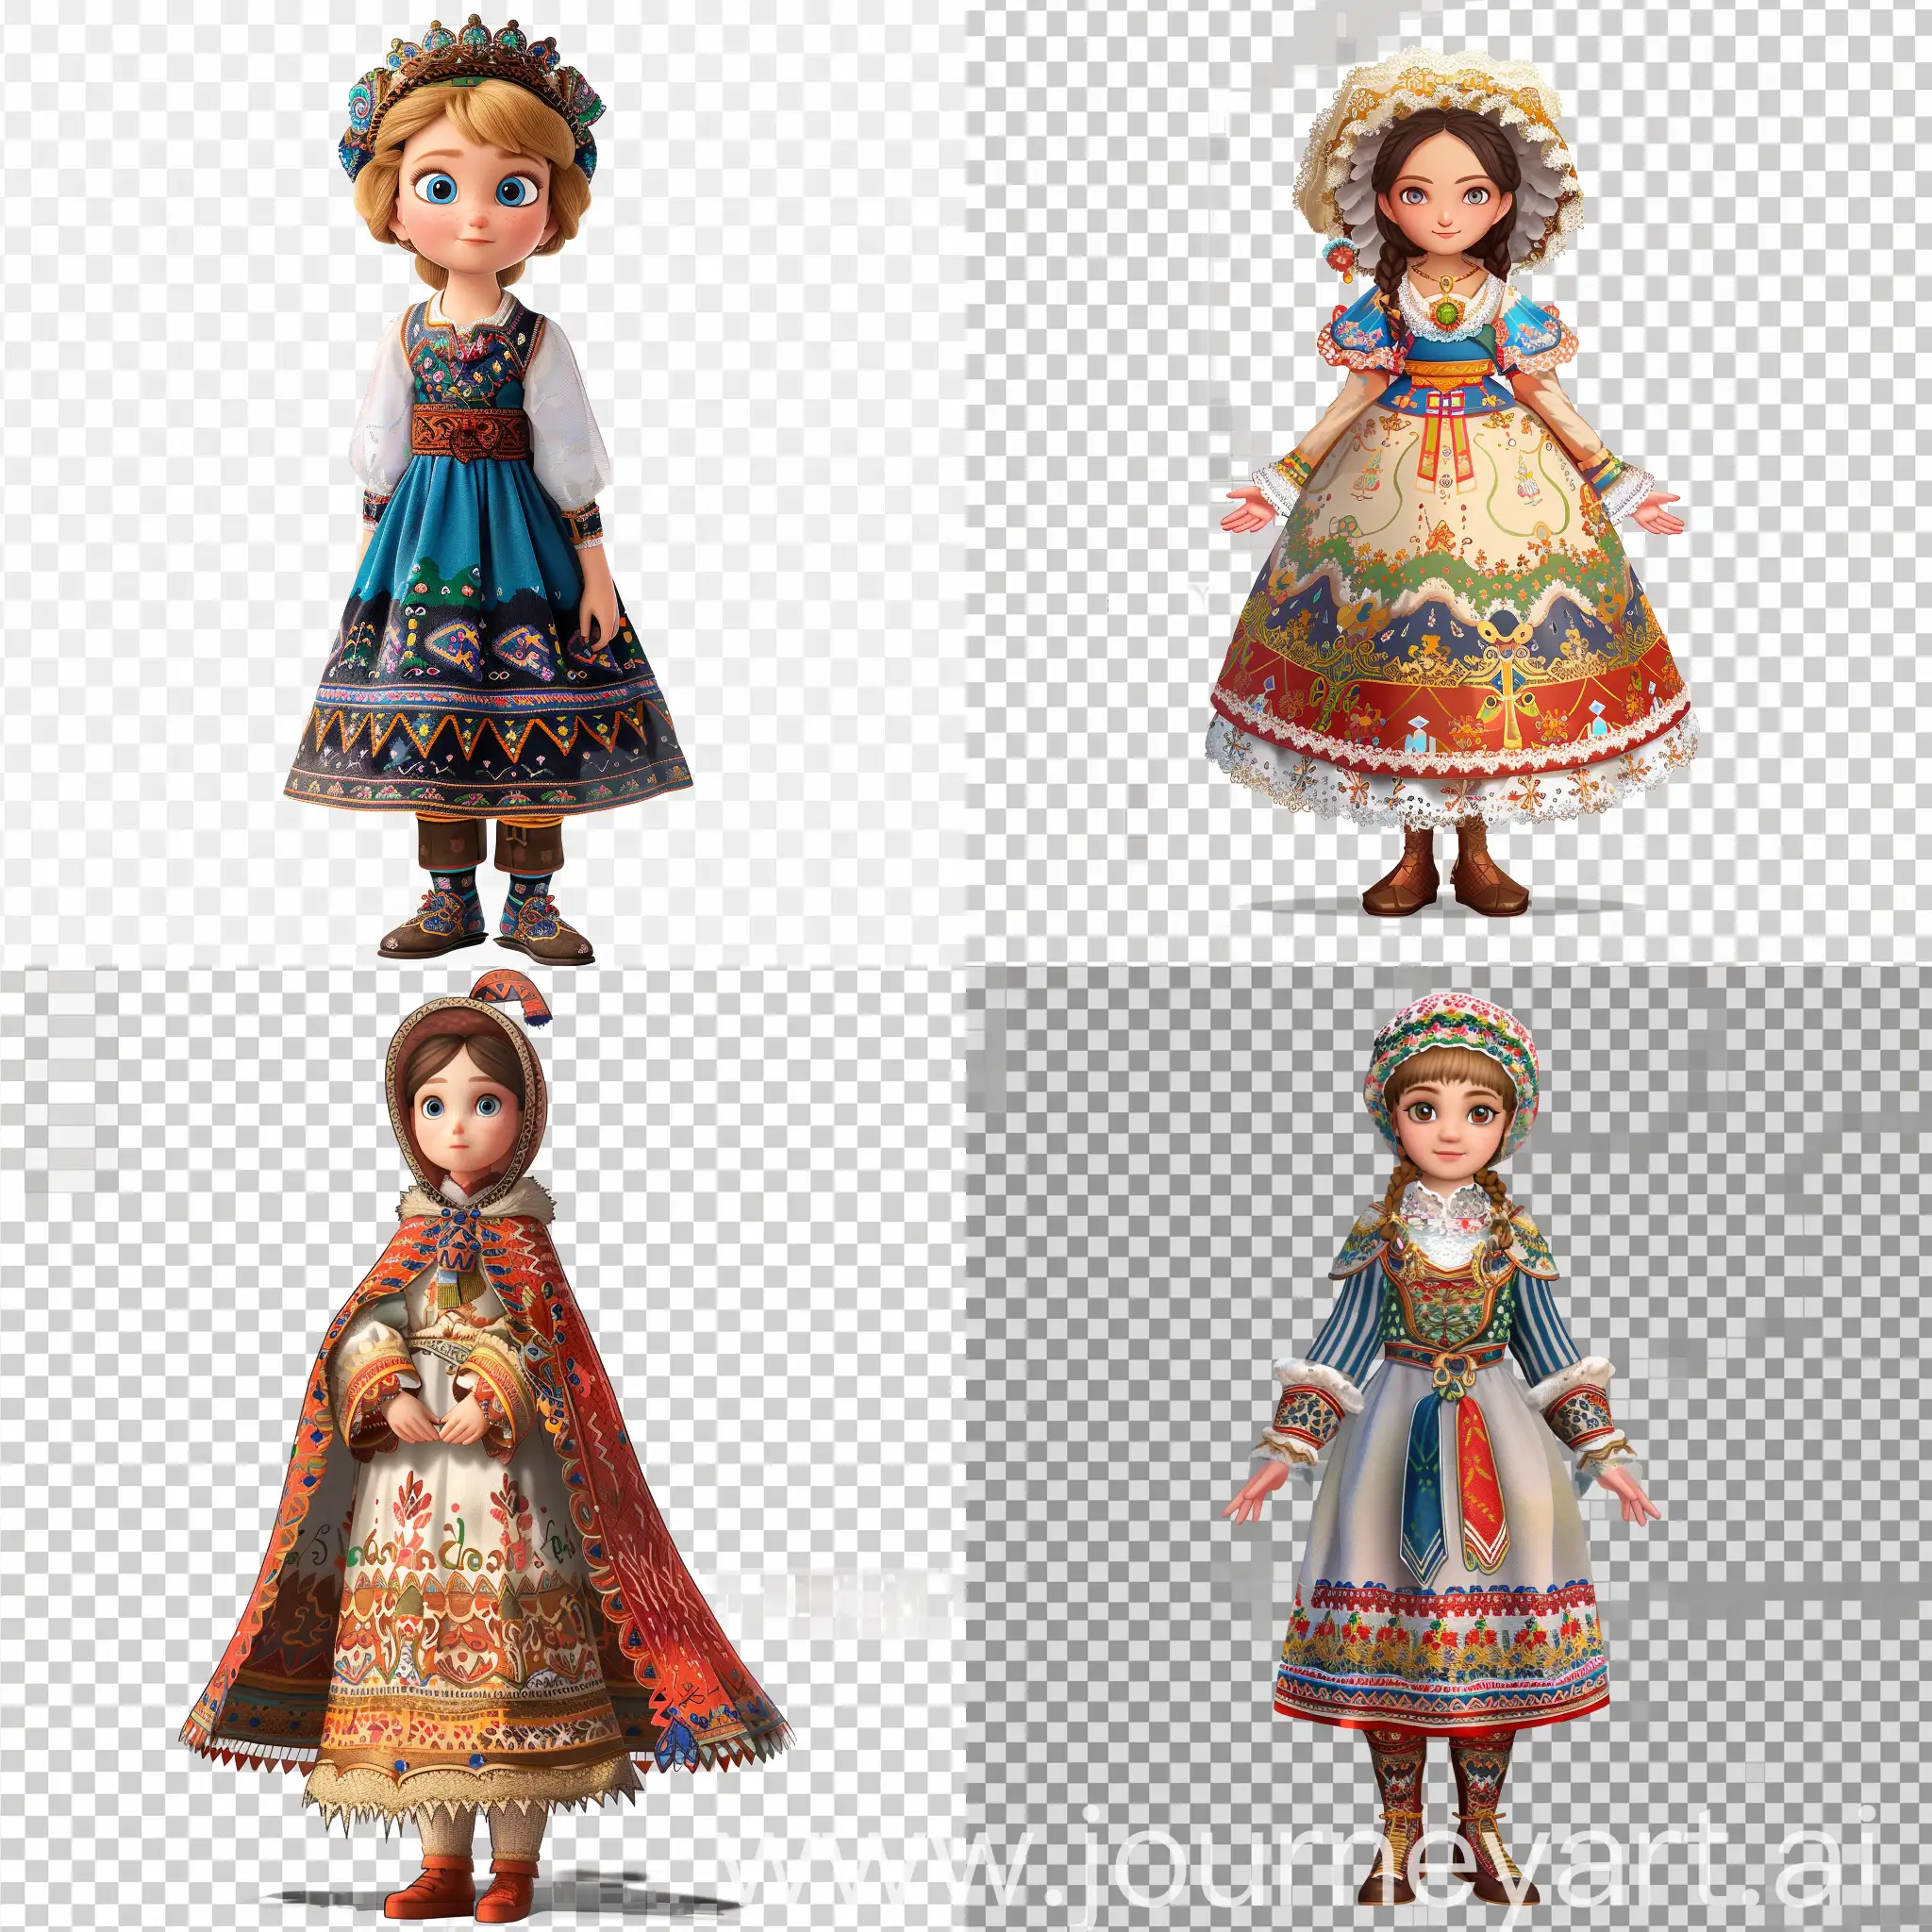 Enchanting-Little-Girl-in-Russian-Folk-Costume-Fantasy-Game-Character